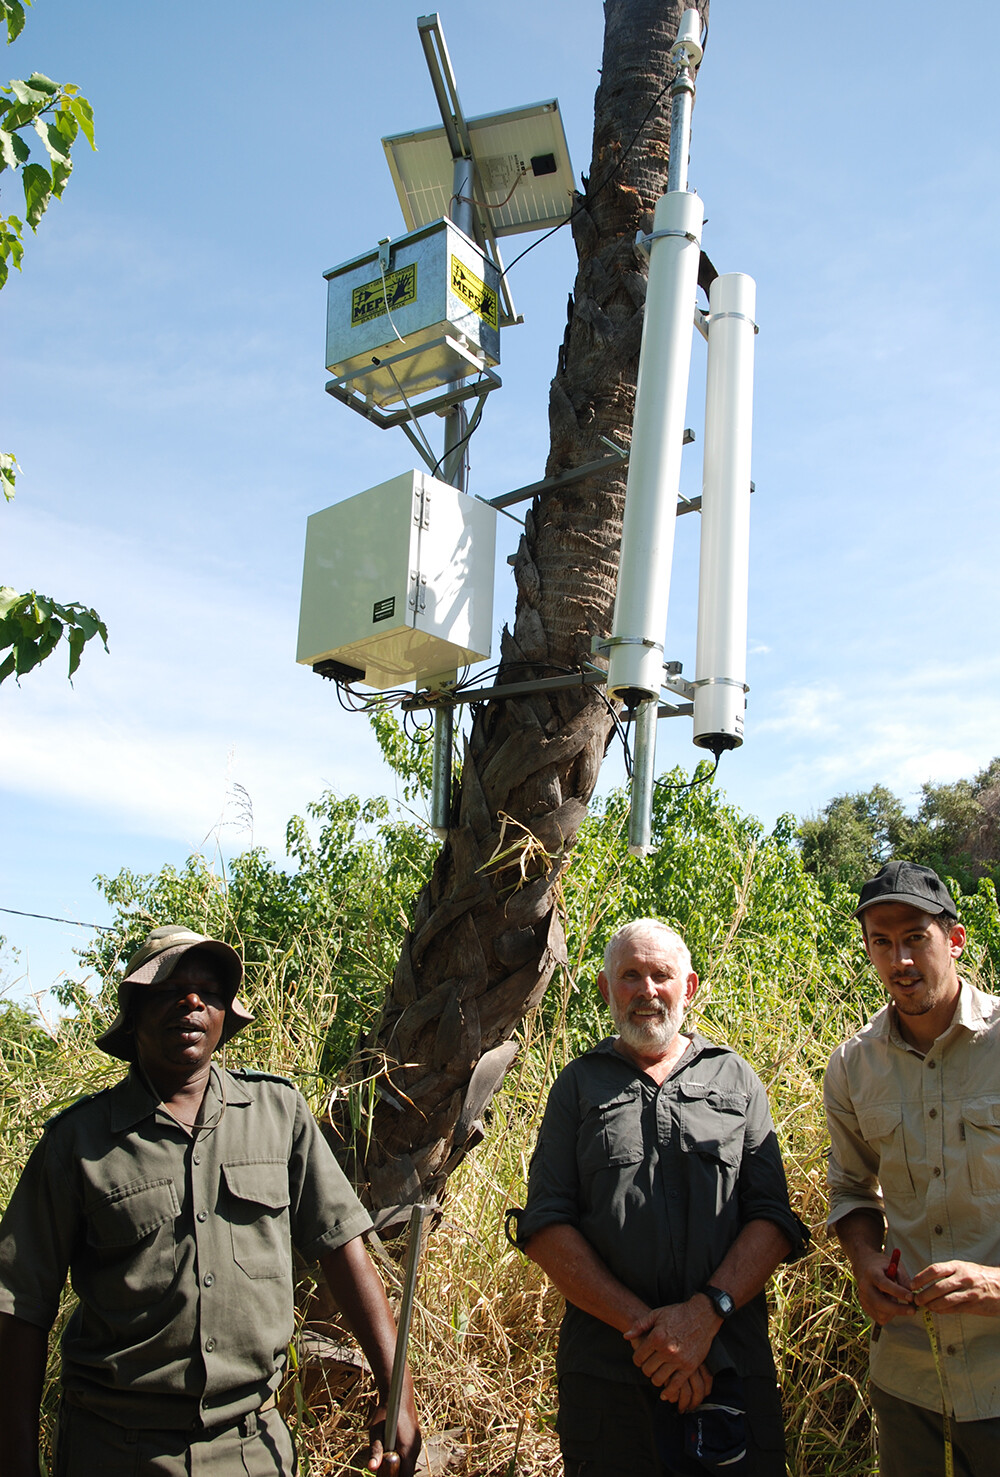 A cosmic ray detector, which is being used in a study that includes UNL's Trenton Franz, is mounted to a tree in South America's Mapungubwe National Park. Pictured (from left) is Steven Khoza, field technician and range for the South African National Parks; Colin Everson, hydrometeorologist and project principal investigator on the project; and Bruce Scott-Shaw, doctoral student at the University of KwaZulu-Natal. 